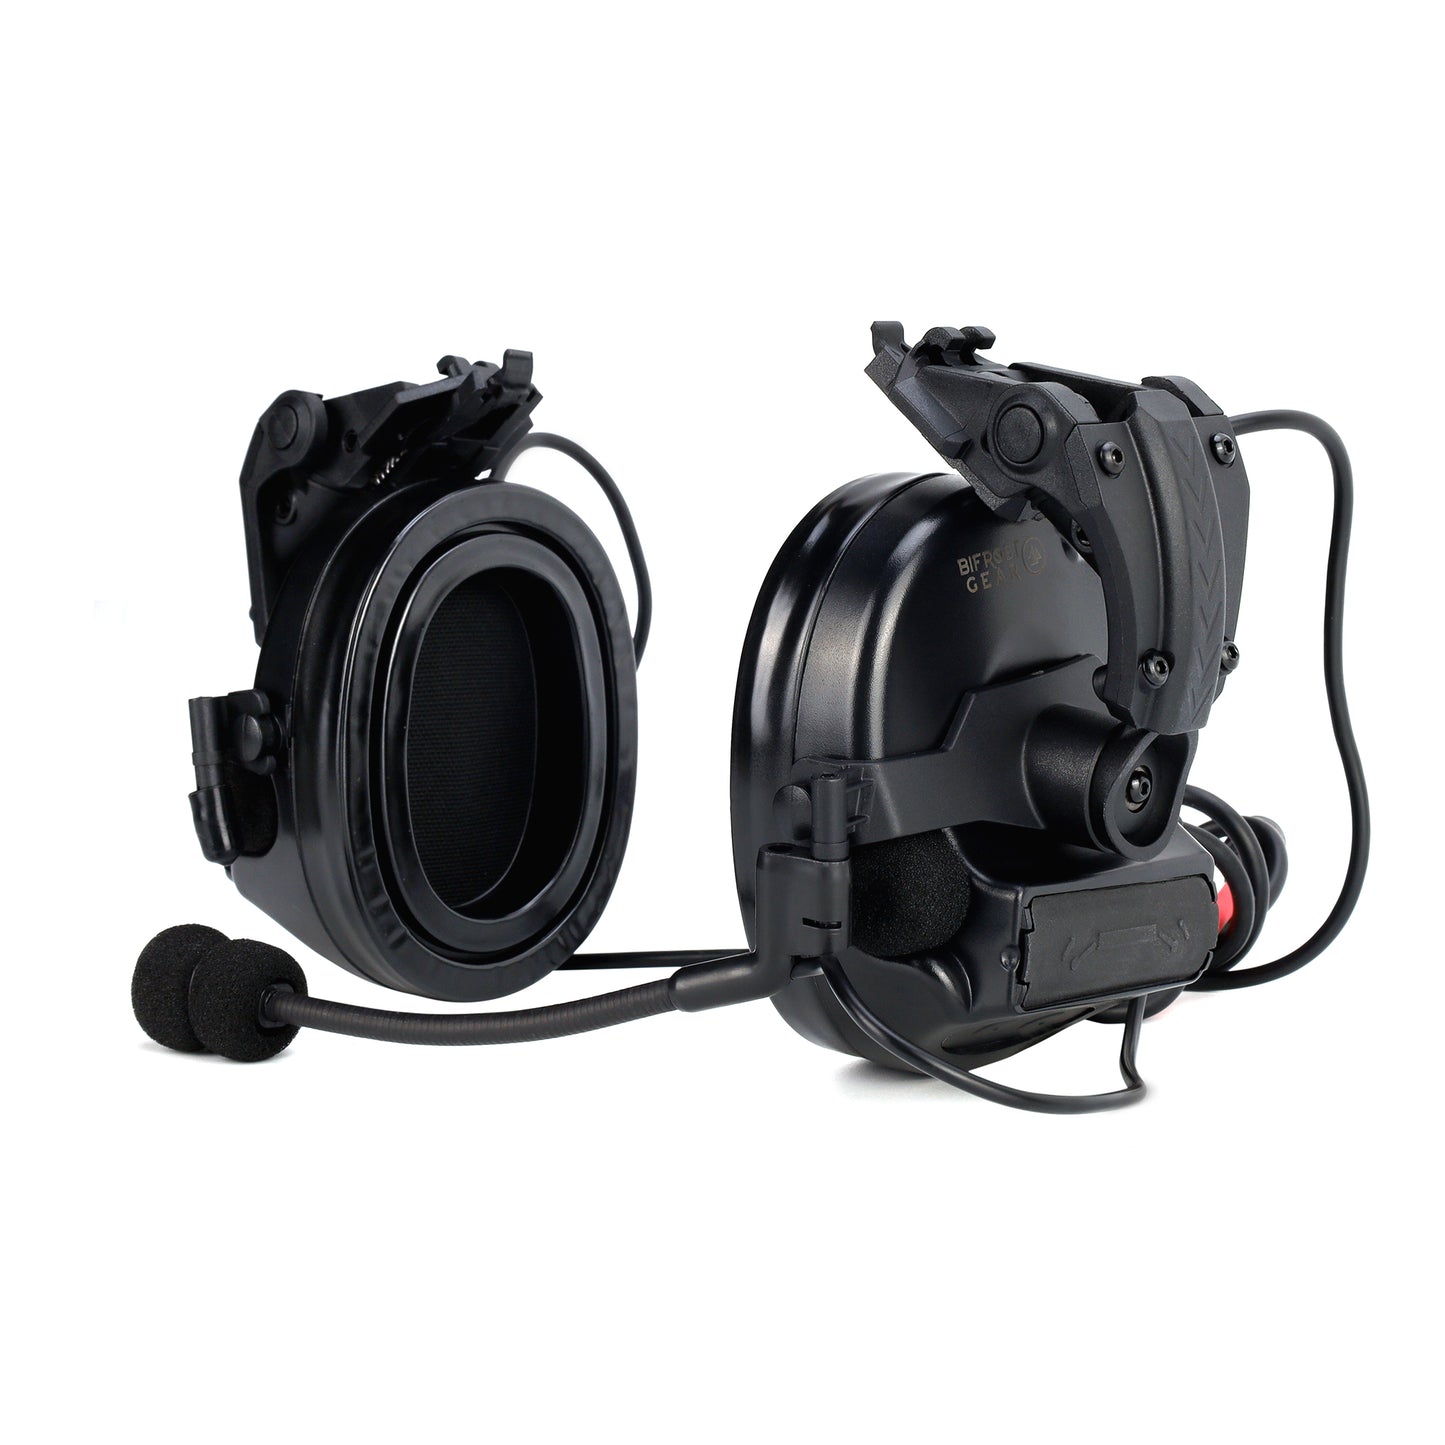 NRR 23db Electronic Hearing Protection Communications Headset with Helmet Rail Adapters